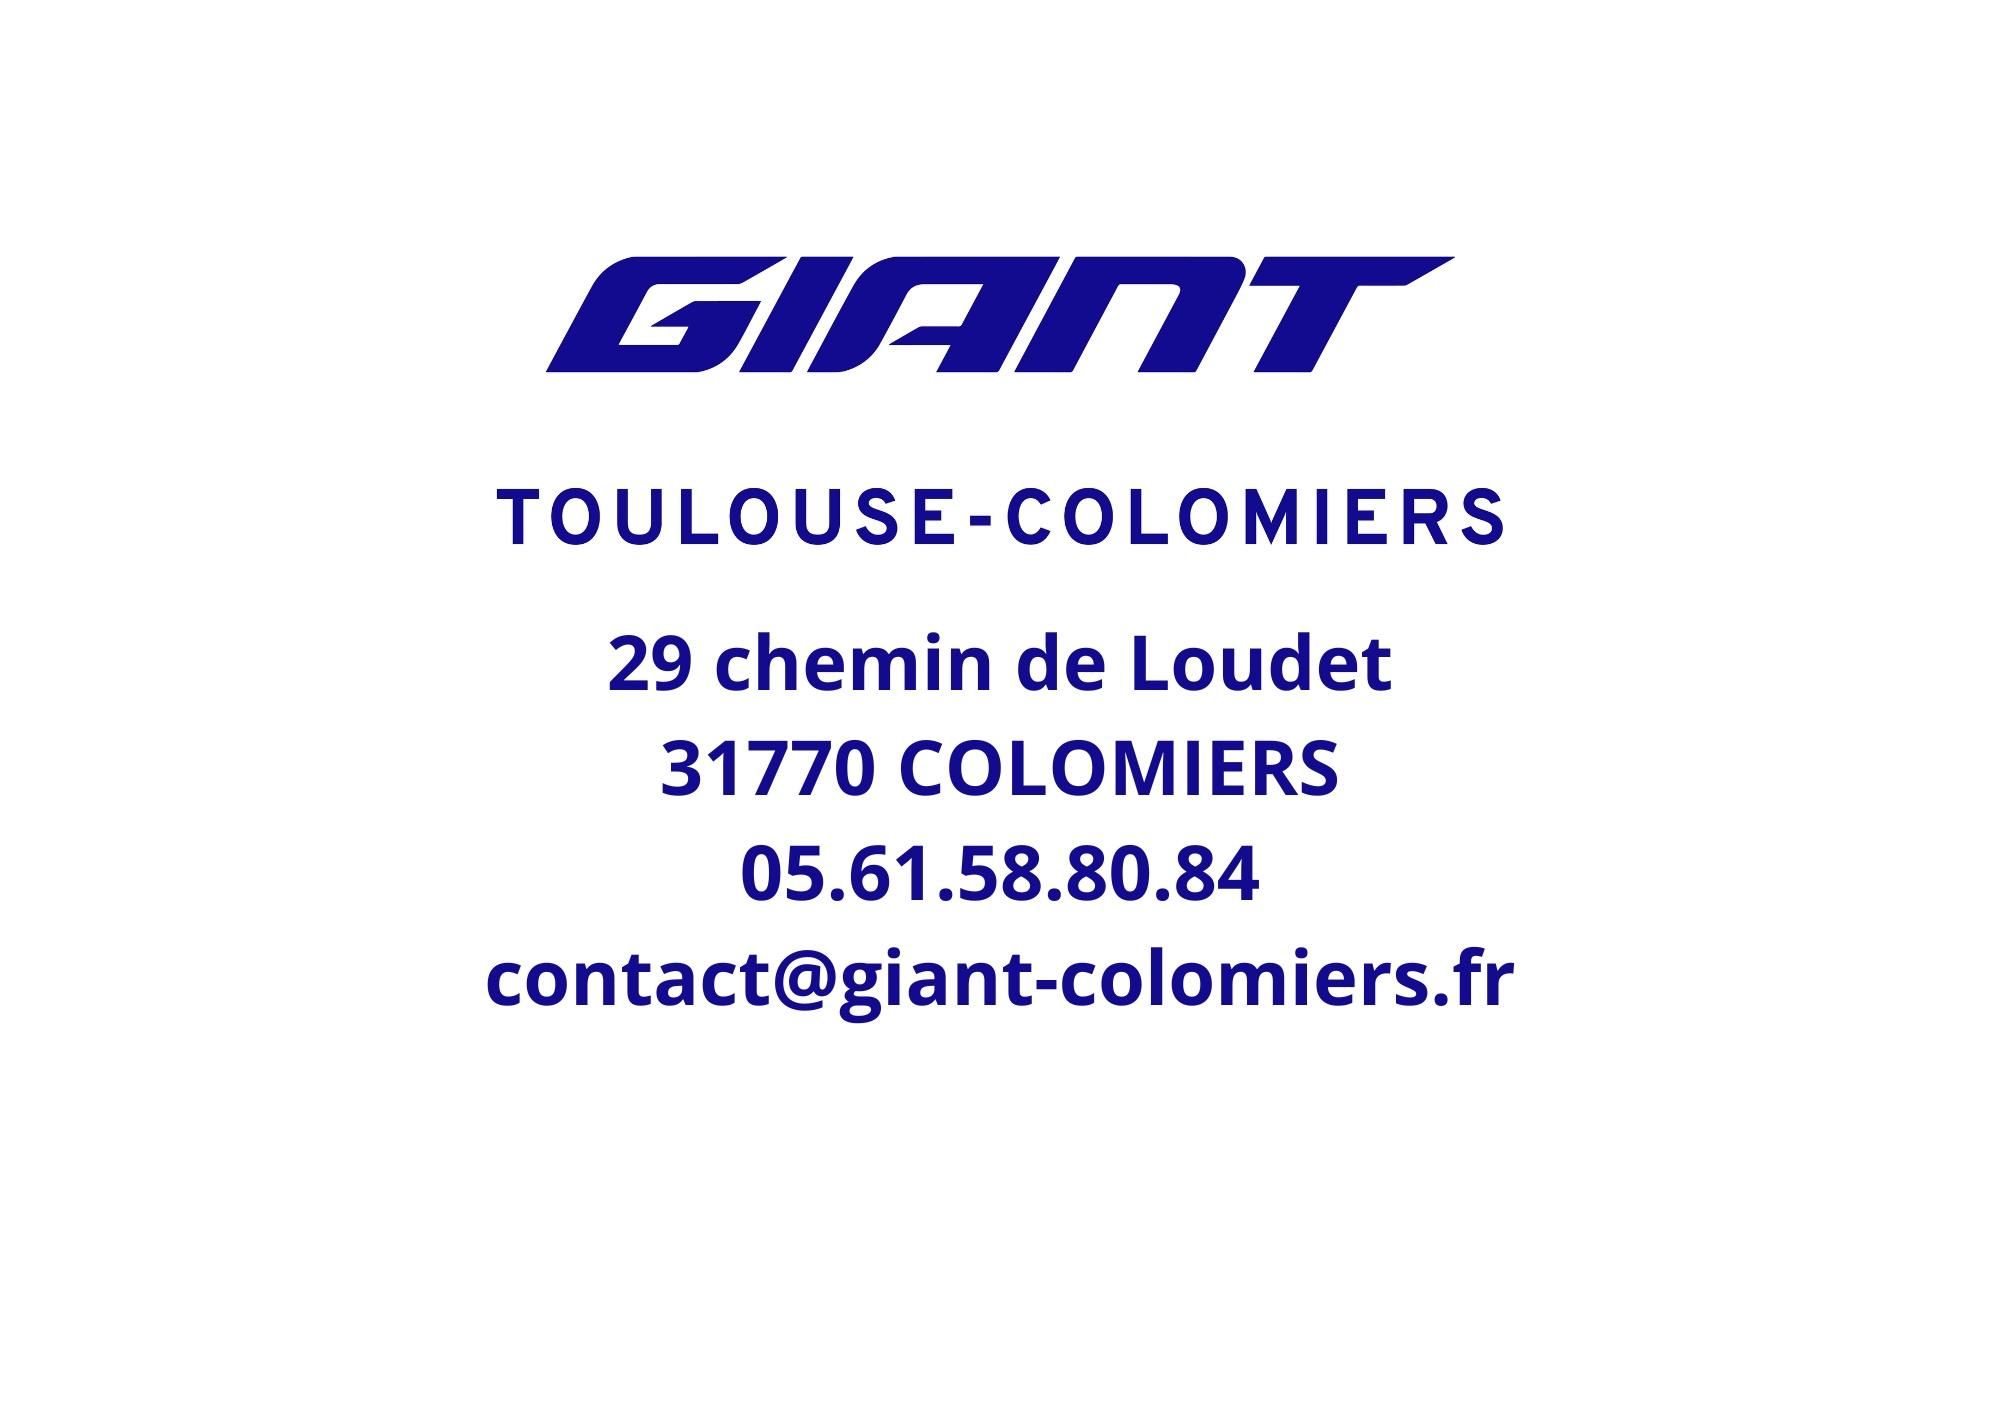 Giant Colomiers